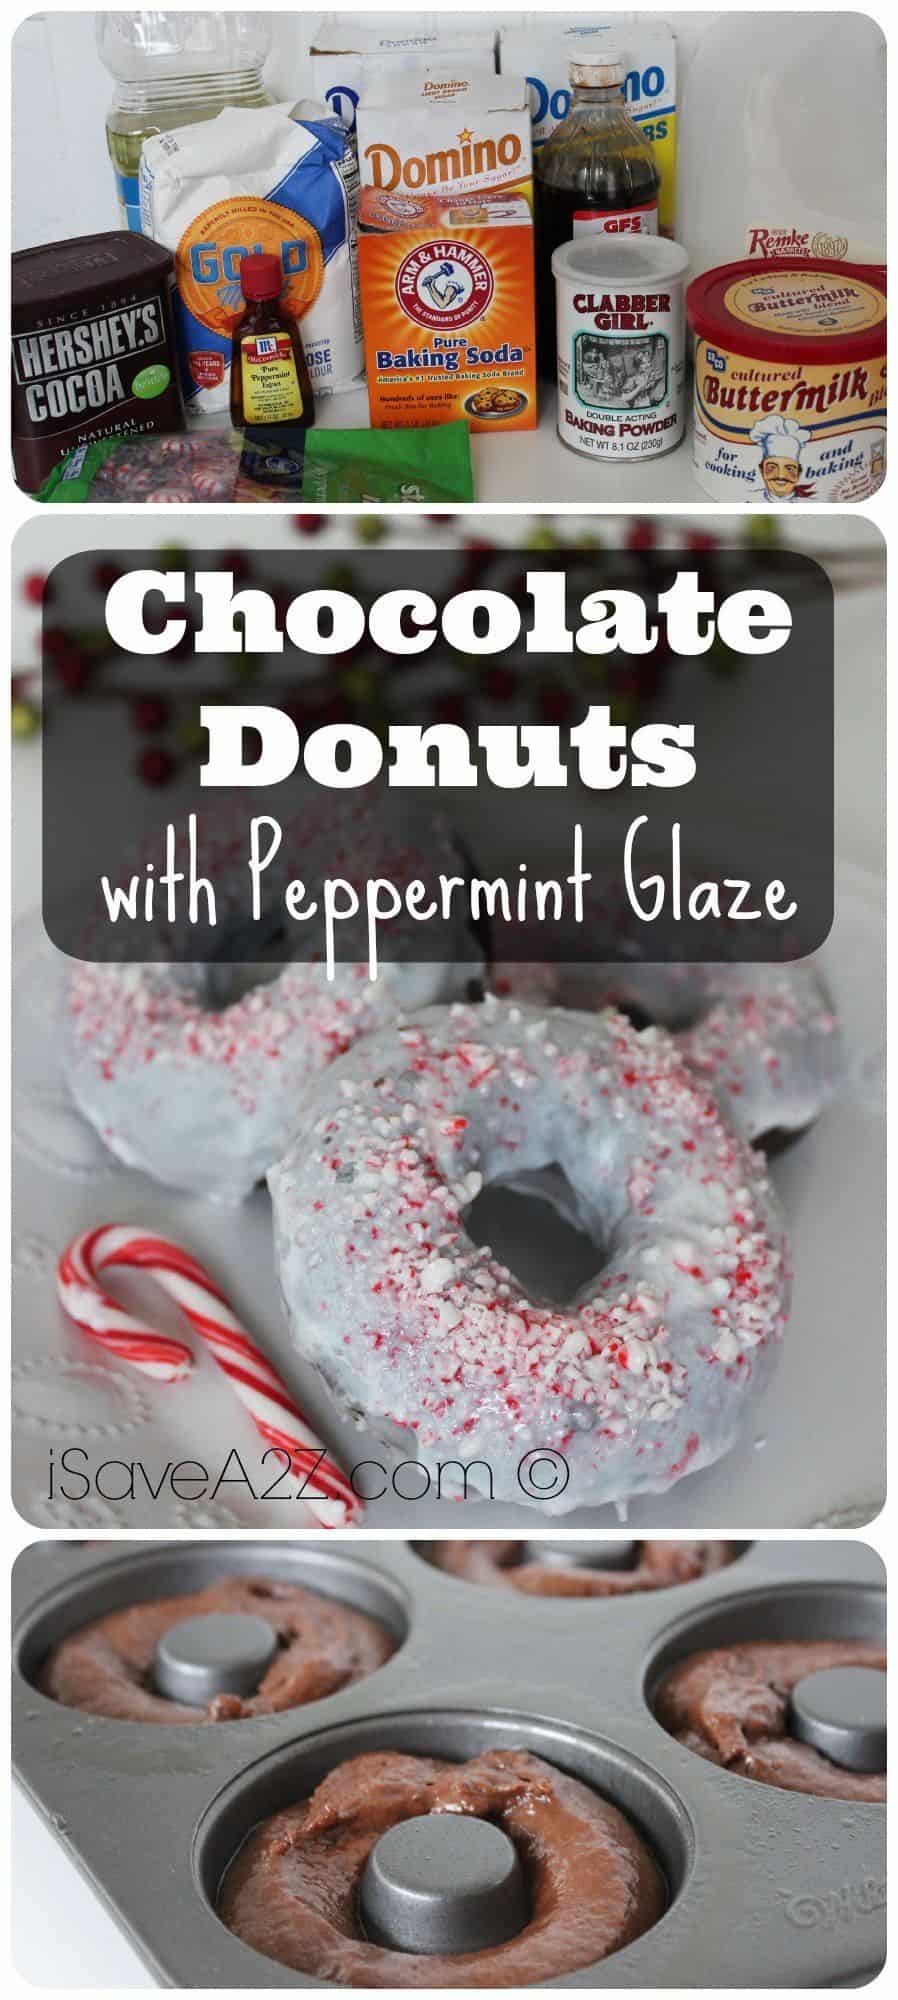 Chocolate Donuts with Peppermint Glaze